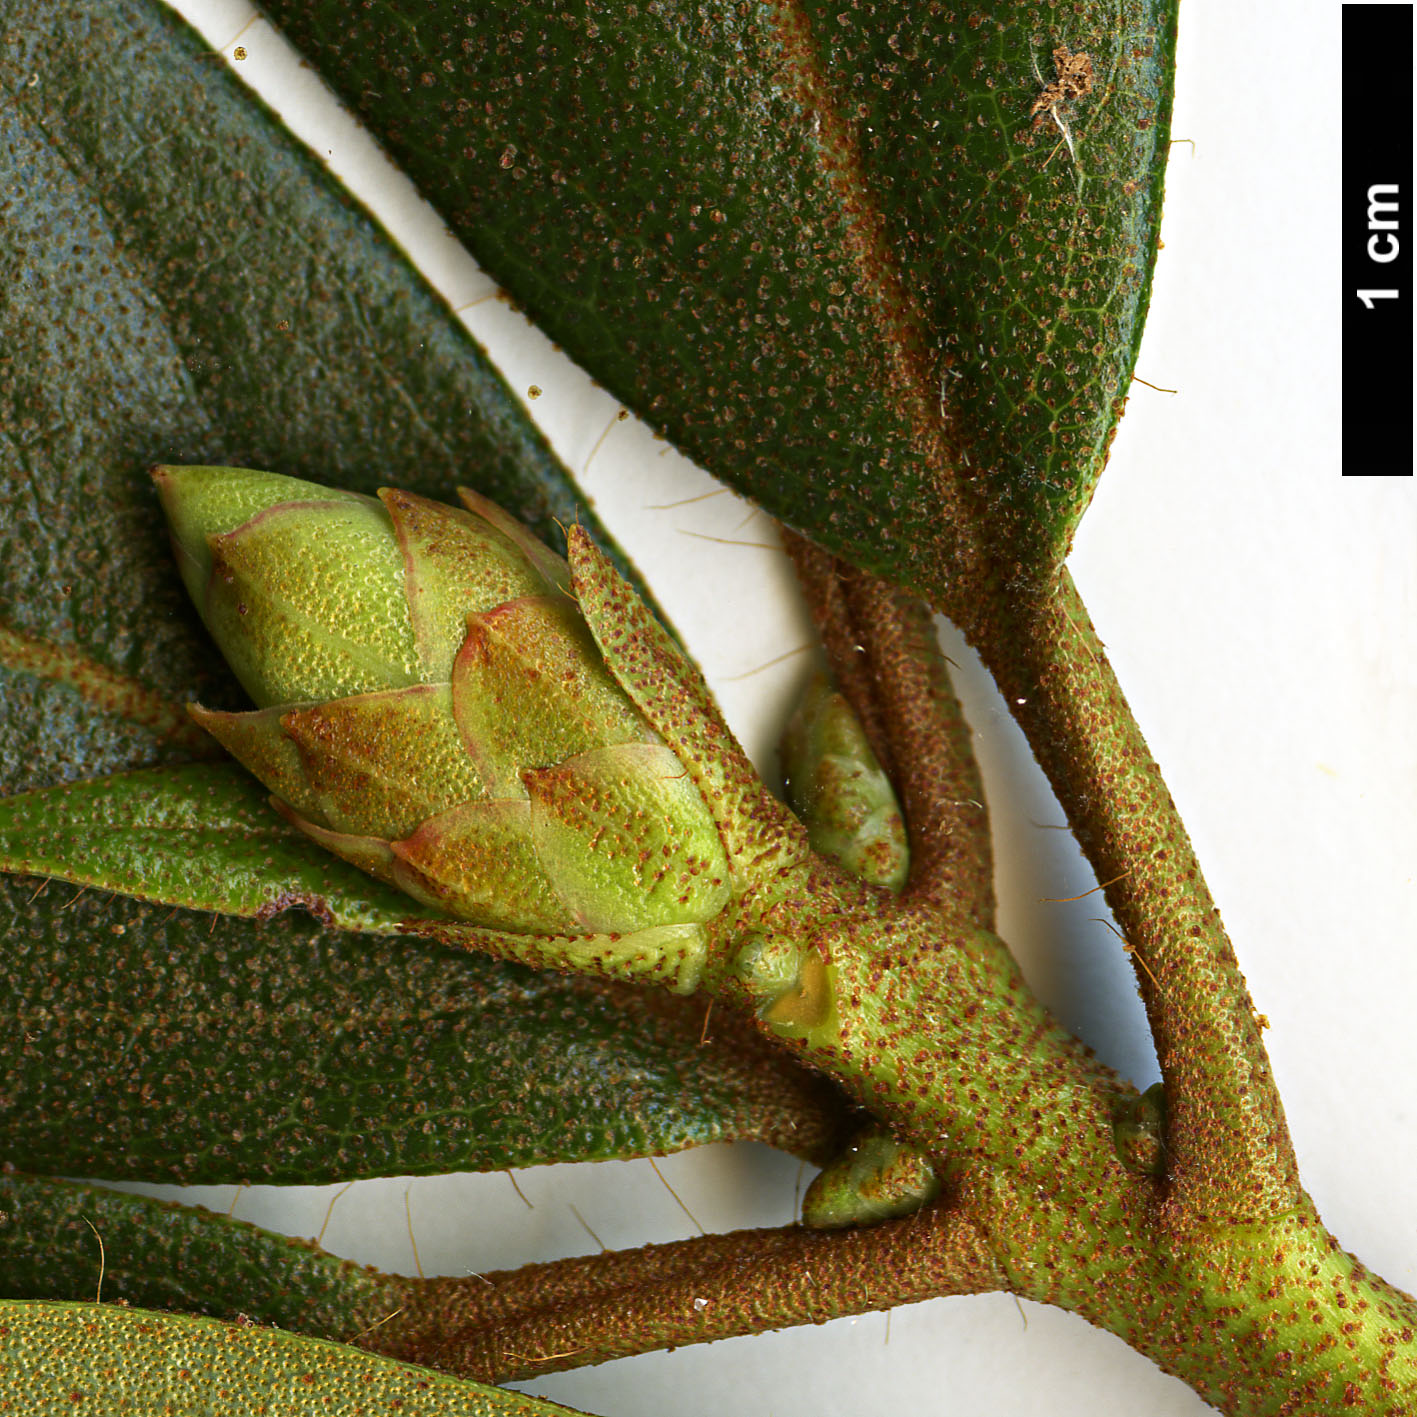 High resolution image: Family: Ericaceae - Genus: Rhododendron - Taxon: fleuryi